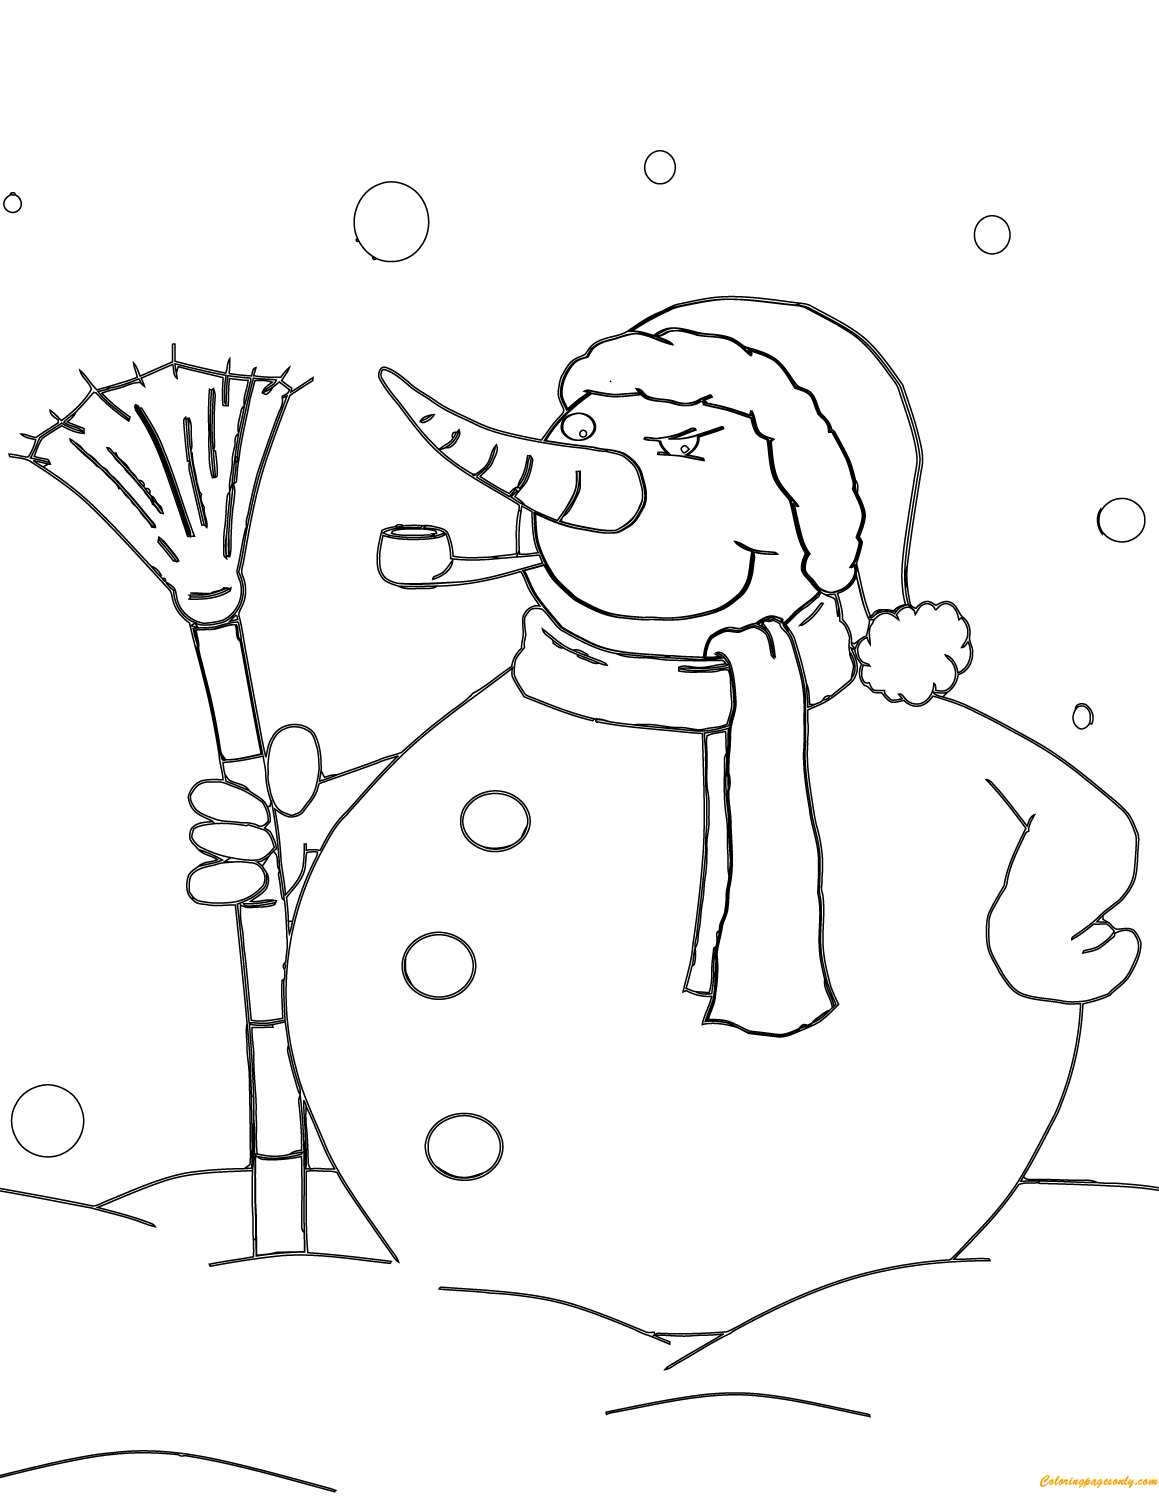 Snowman with Pipe and Broom Coloring Pages